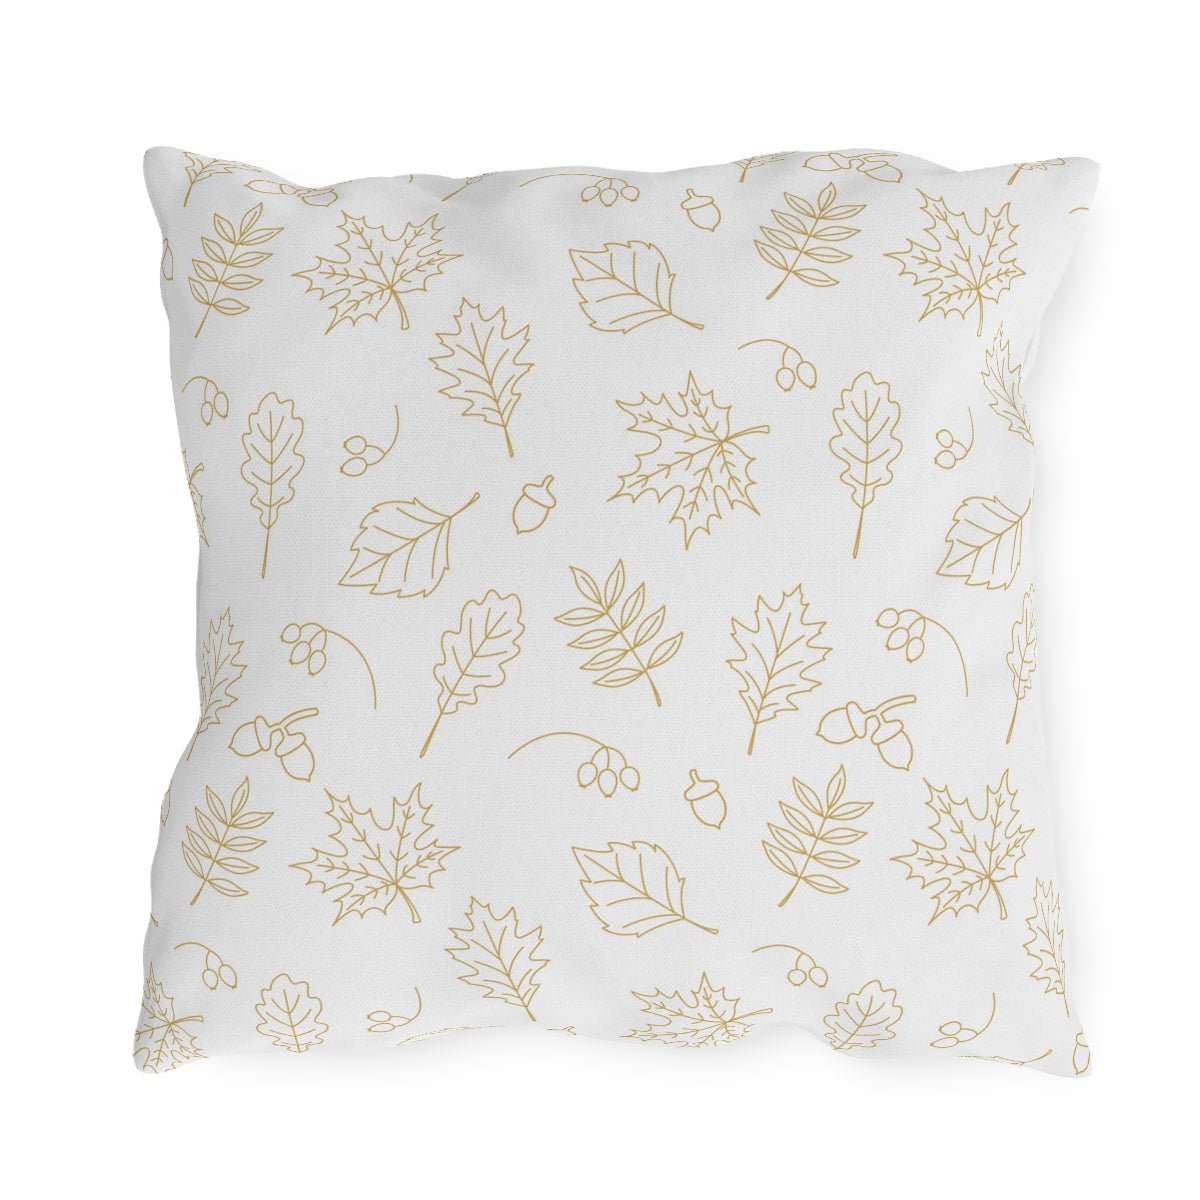 Acorns and Leaves Outdoor Pillow - Puffin Lime